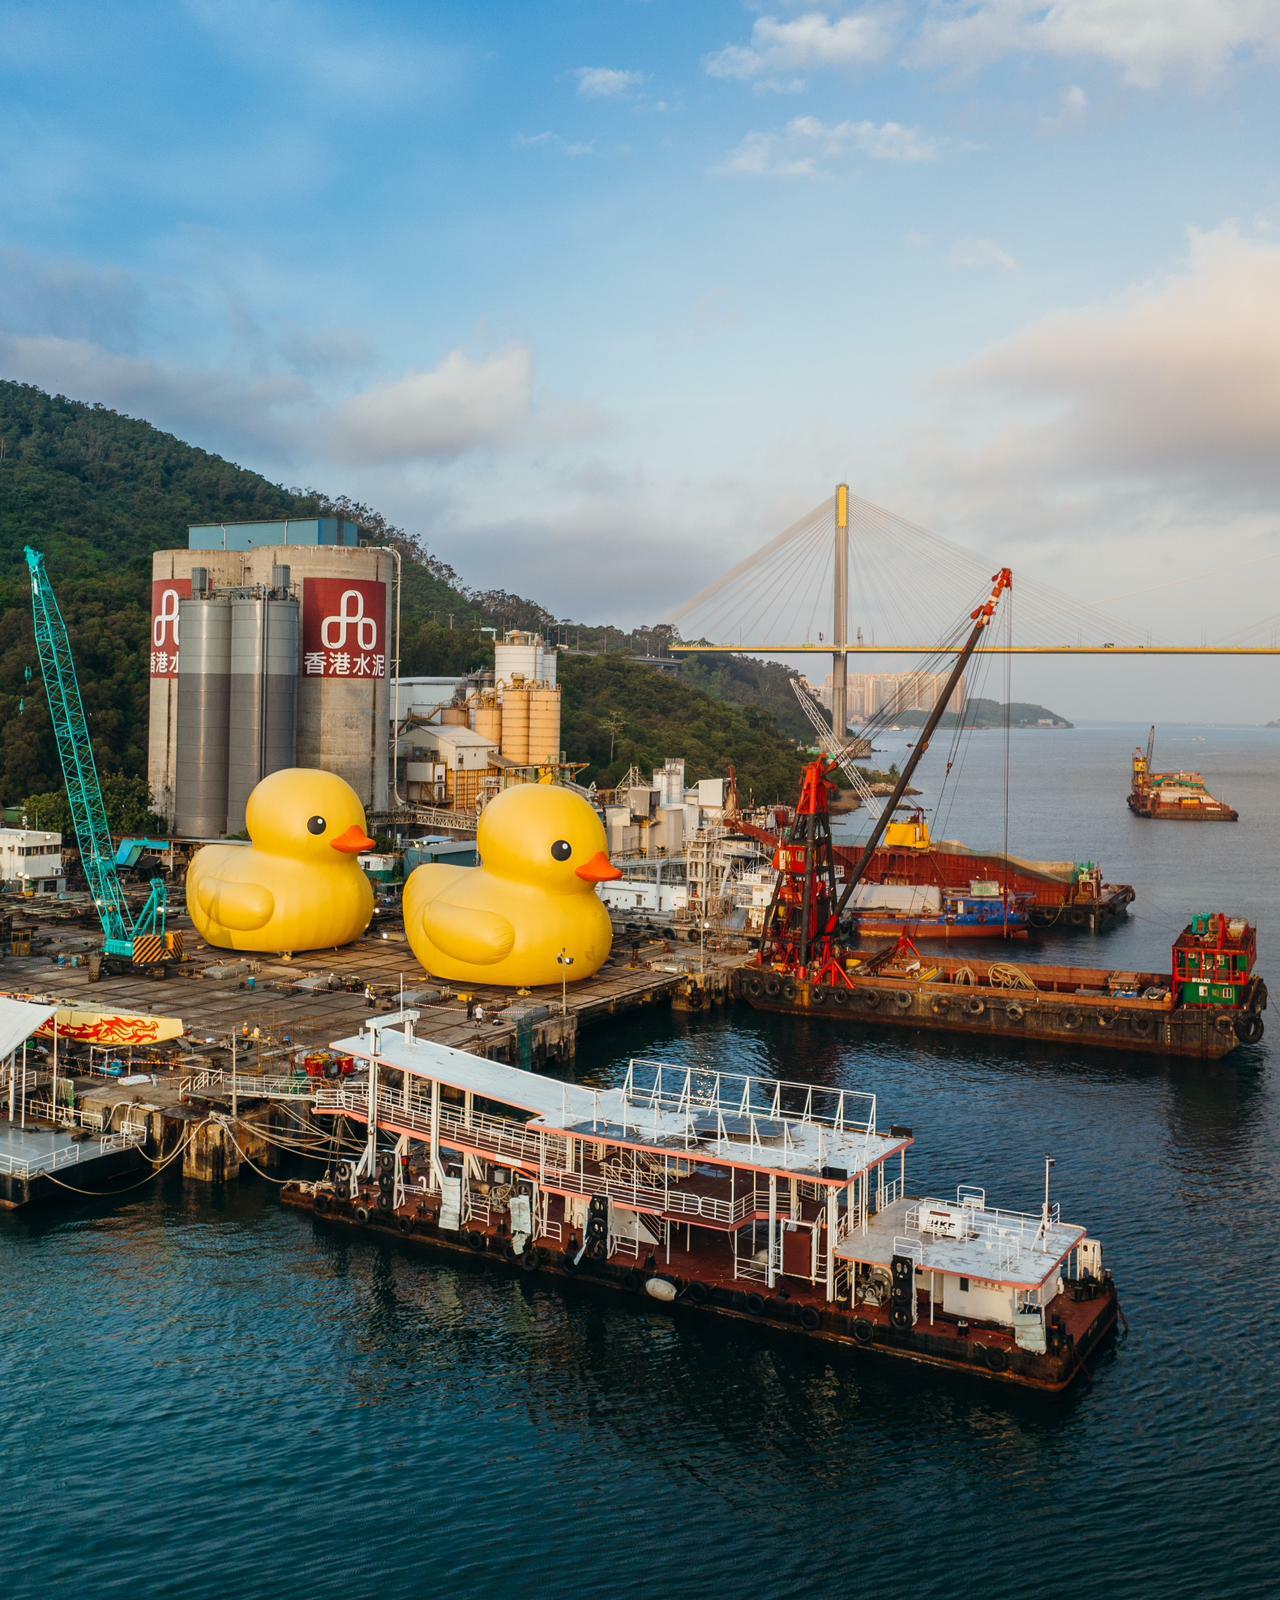 The giant inflatable rubber duck returns to Hong Kong after a decade